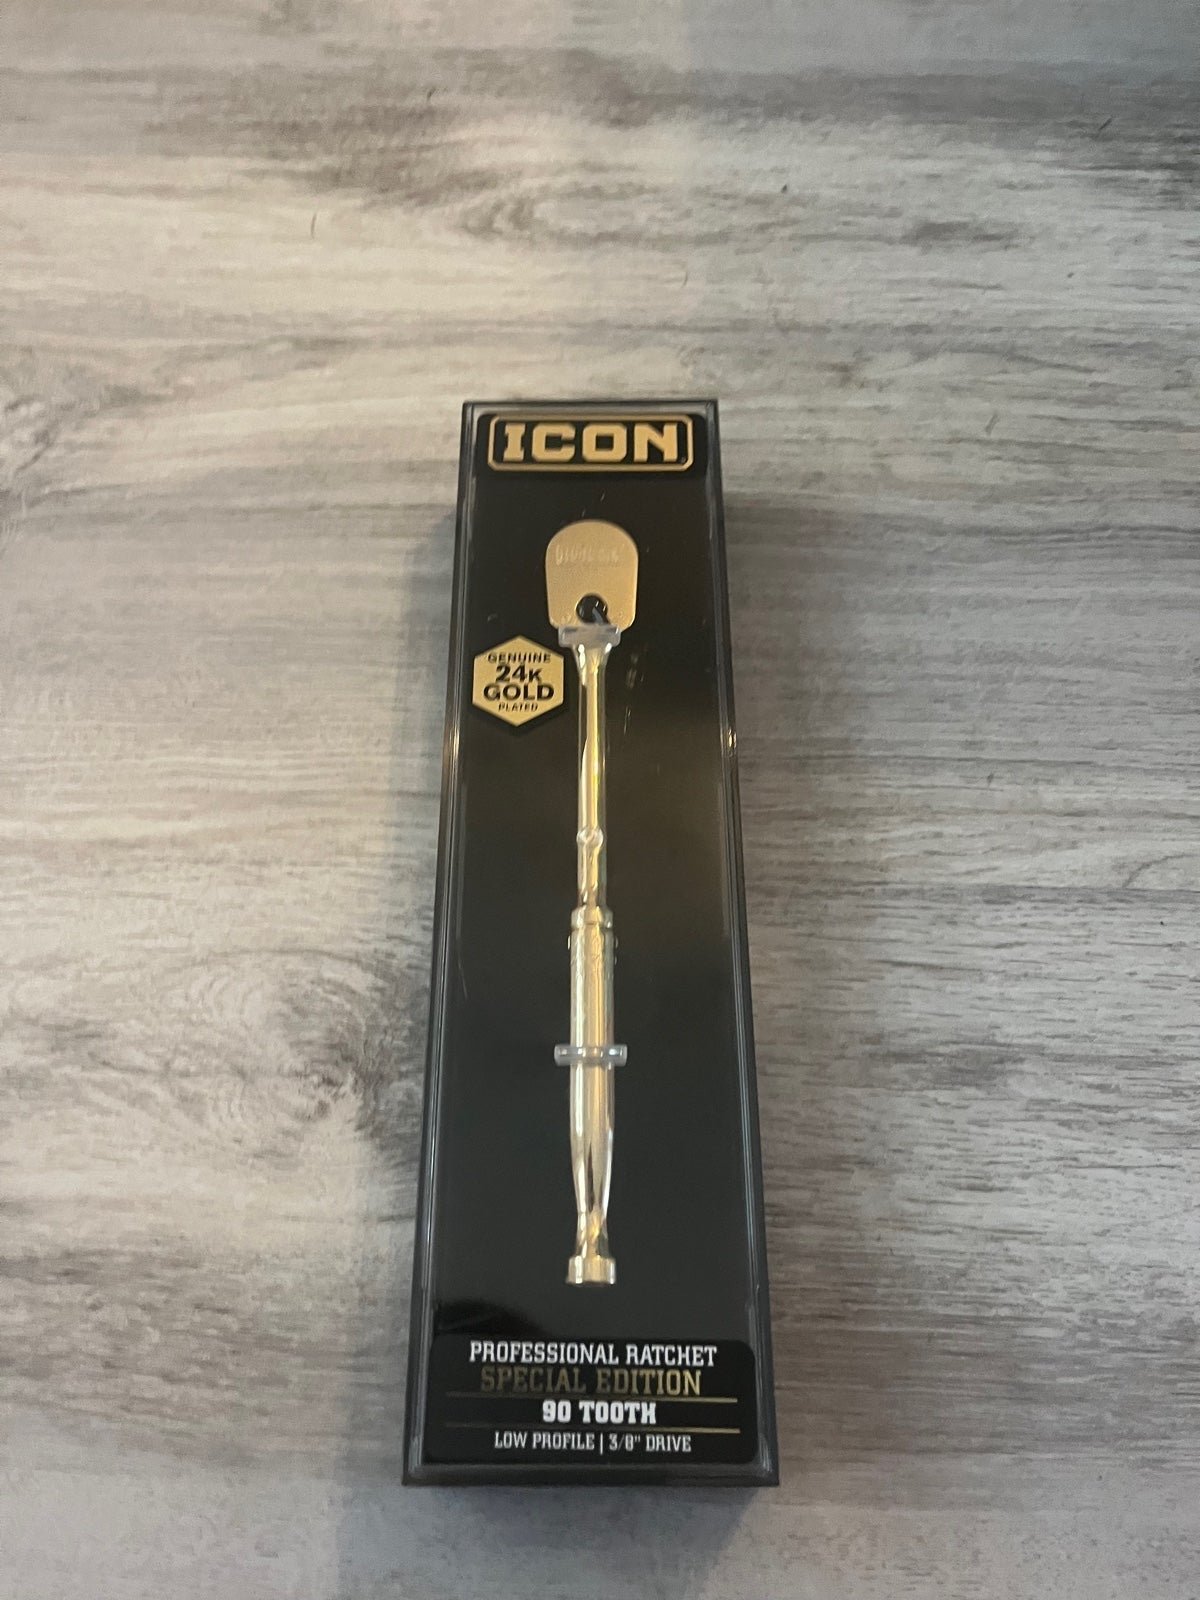 Icon 24k gold plated professional ratchet special edition 3/8 drive 2xpHWndm2